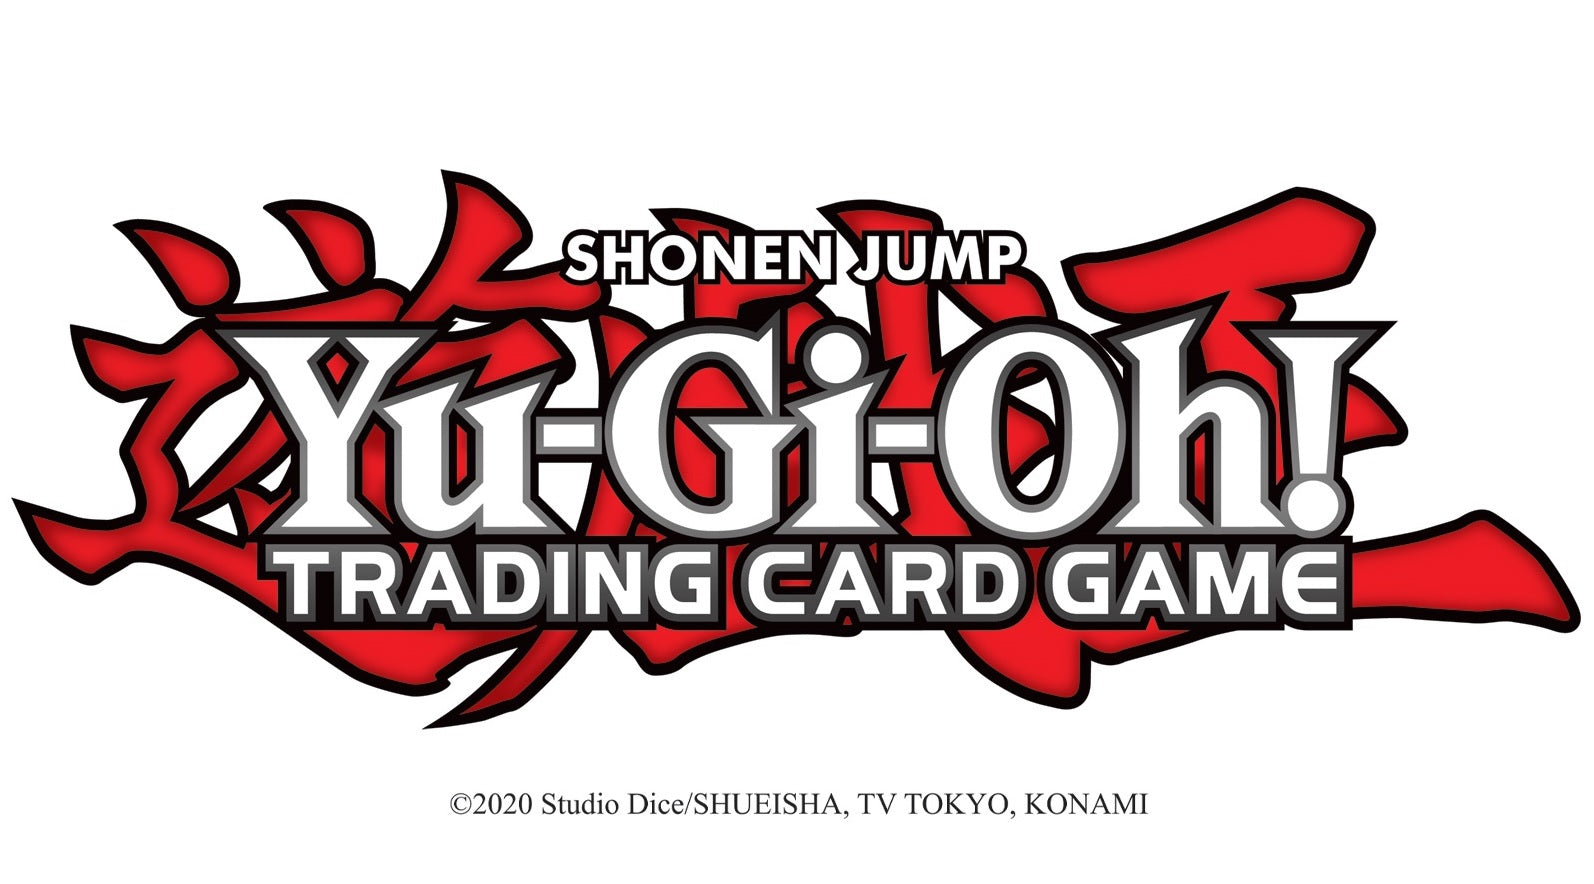 YGO LEGENDARY DUELISTS: SYNCHRO STORM (Release Date:  2021-10-29) | The CG Realm